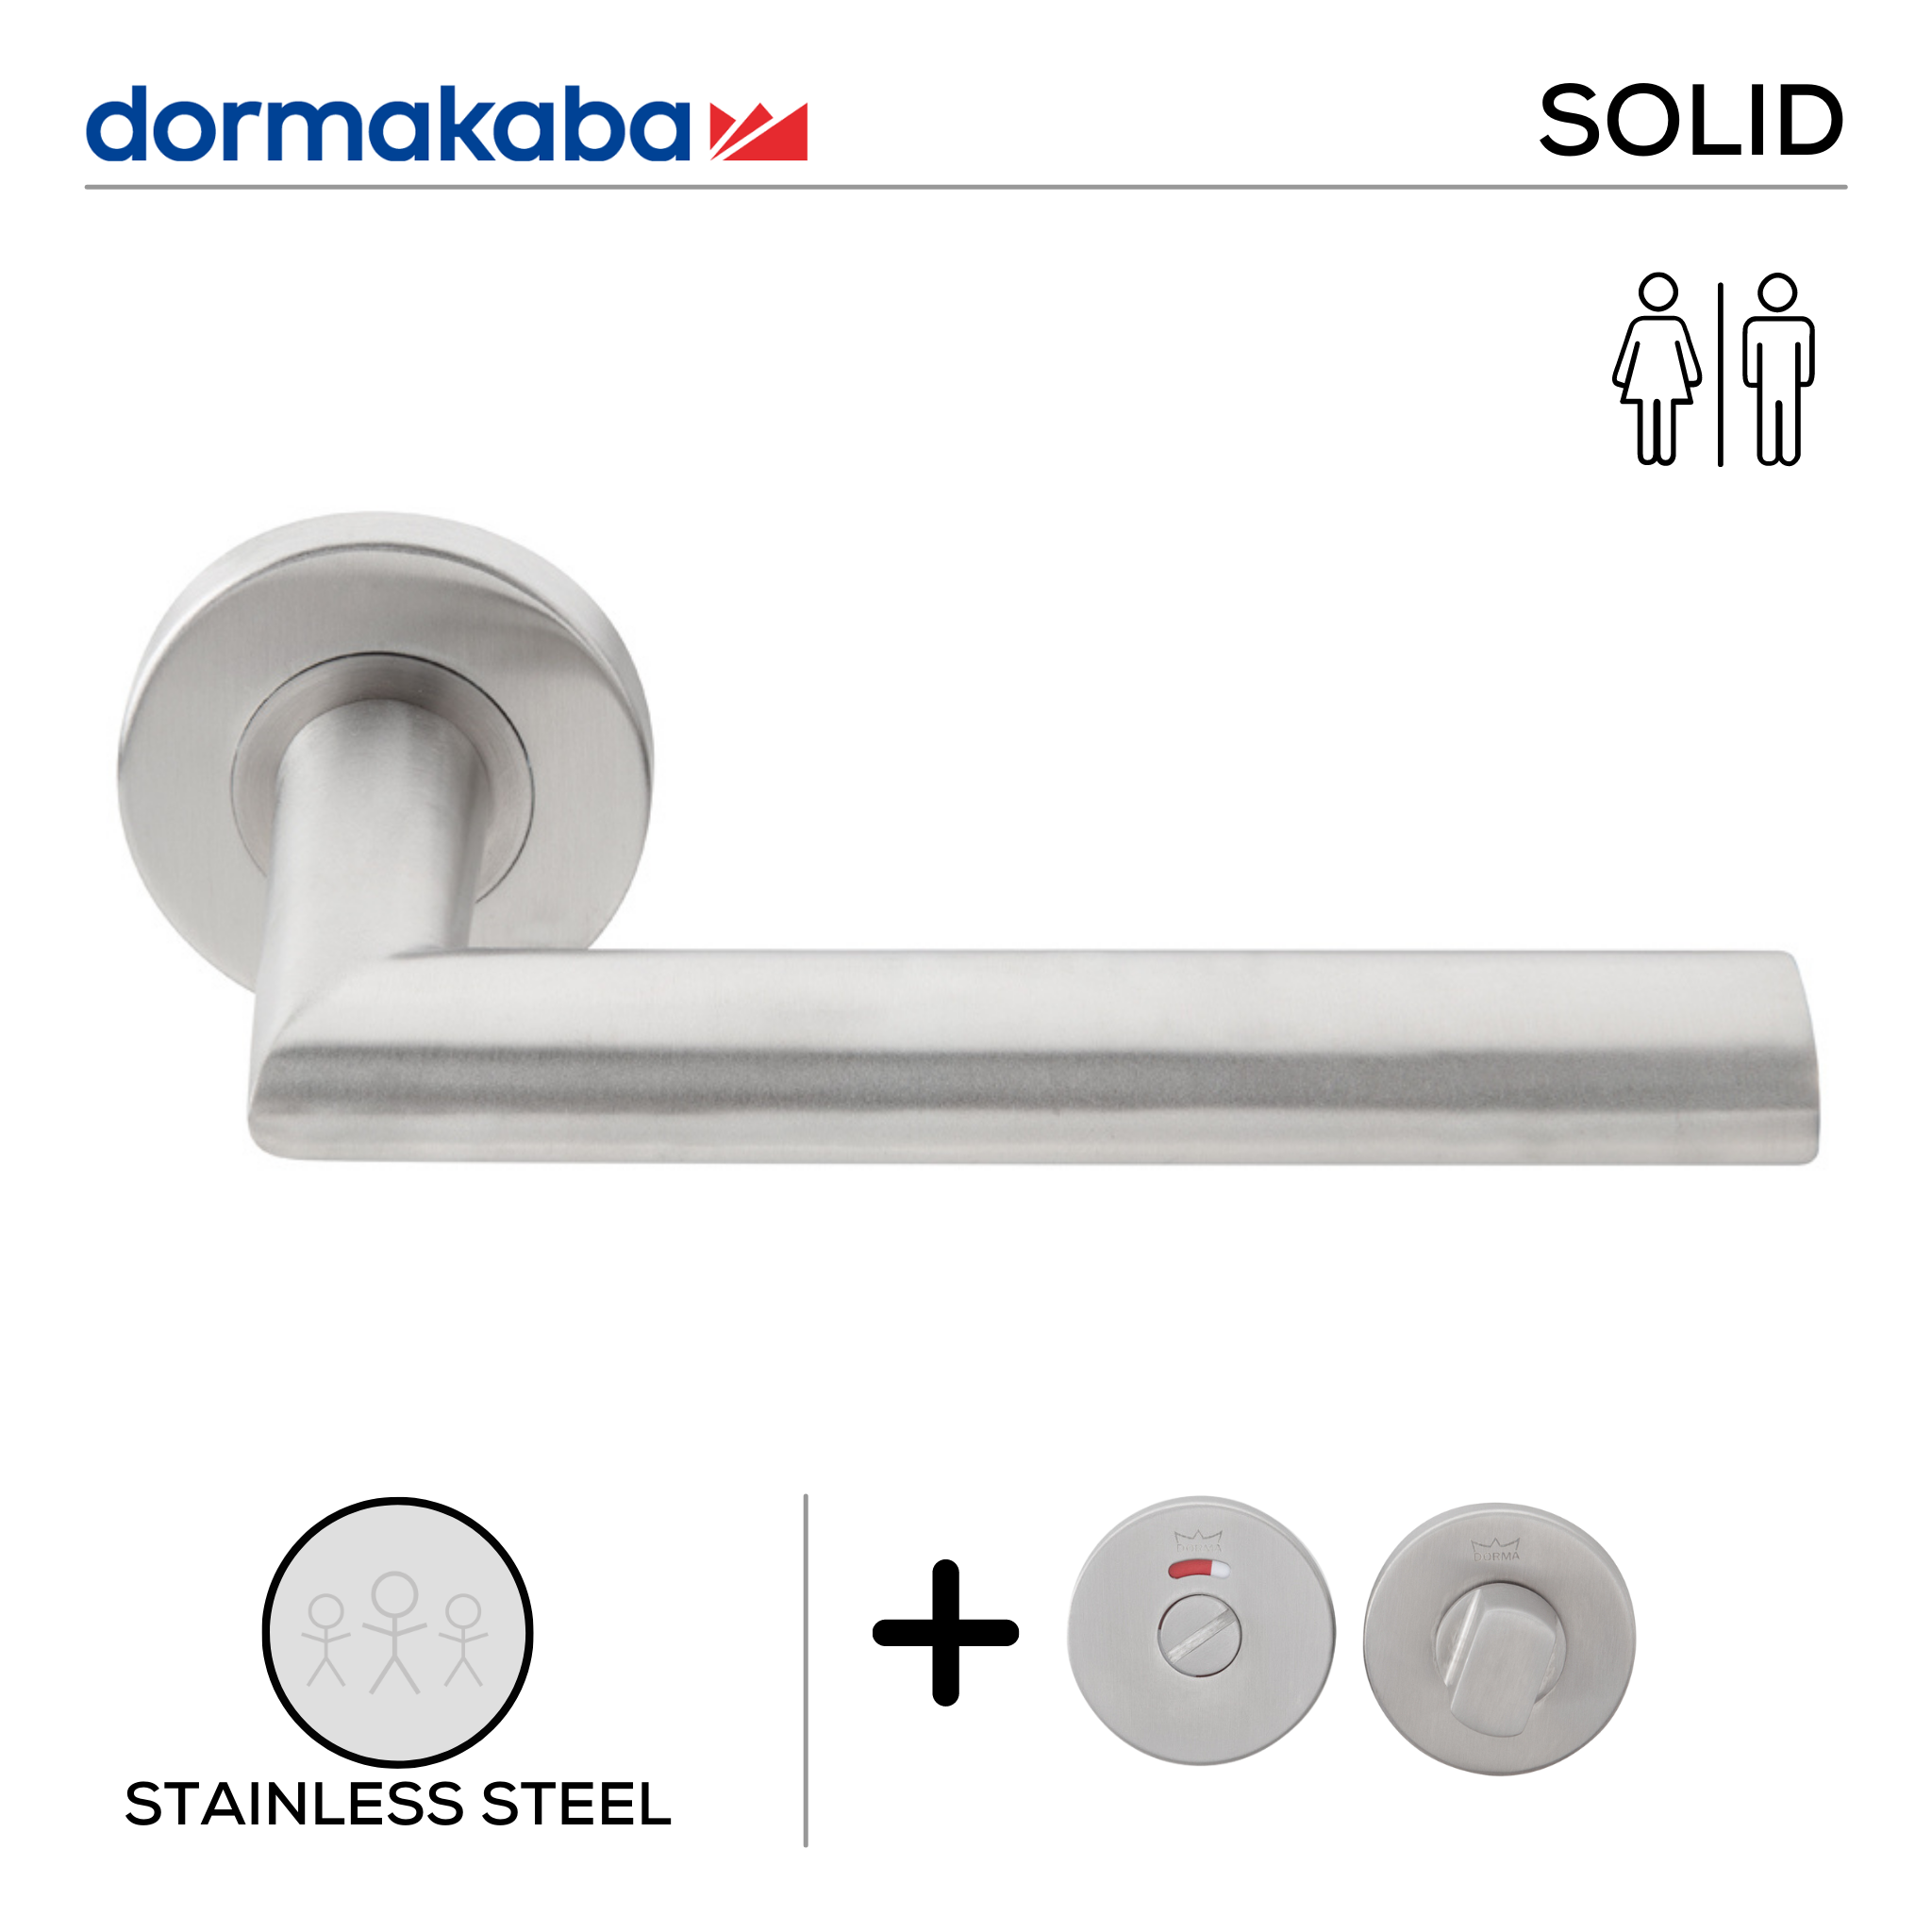 SH 823 Bathroom W/C, Lever Handles, Solid, On Round Rose, With Bathroom (WC) Indicator Set - DWC 005, 151mm (l), Stainless Steel, DORMAKABA